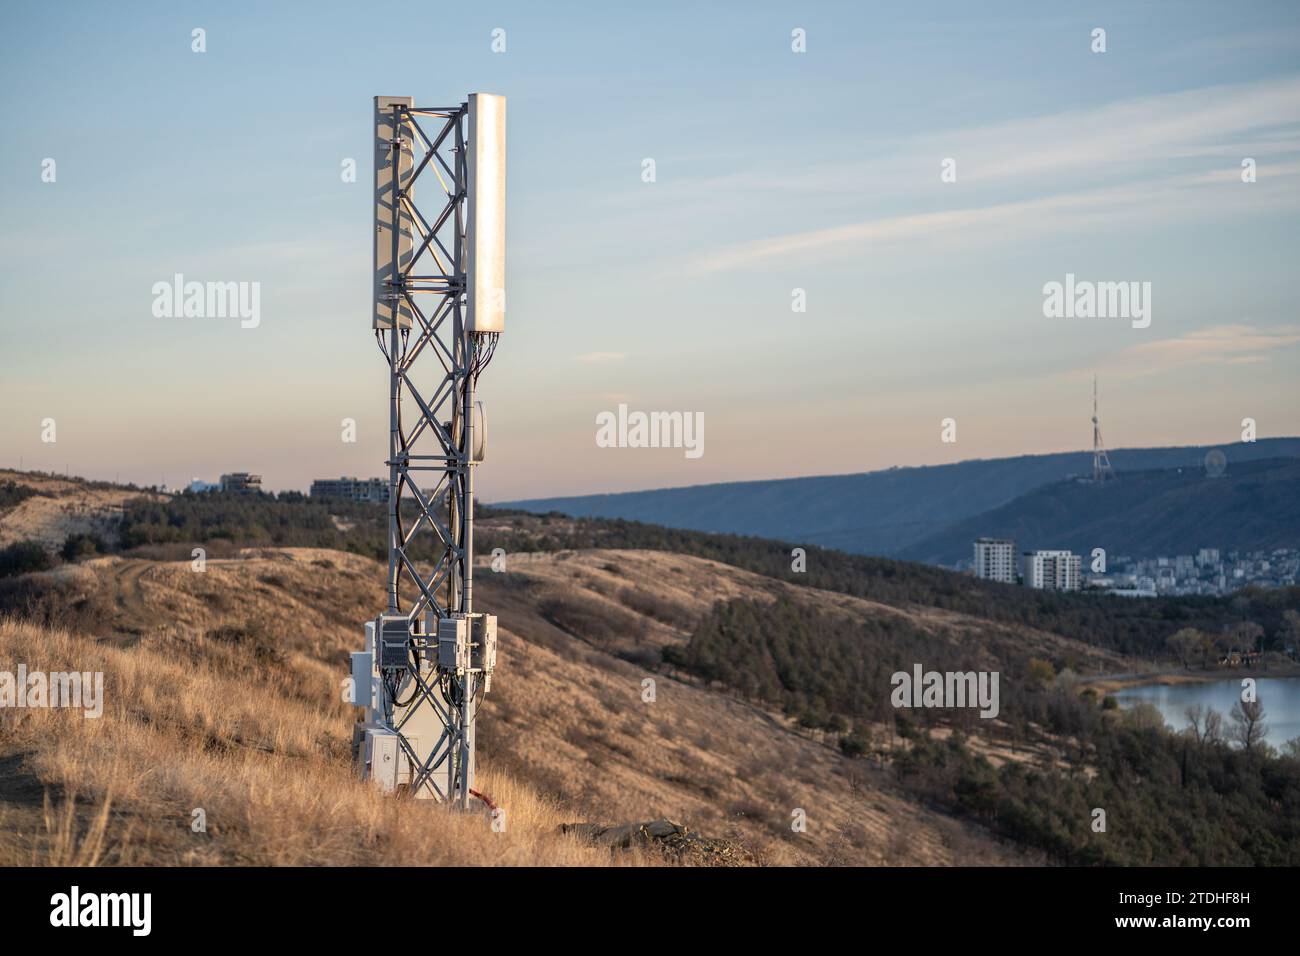 Cellular tower covering wide area, transmitting 5G signals for mobile phone, internet connection  Stock Photo